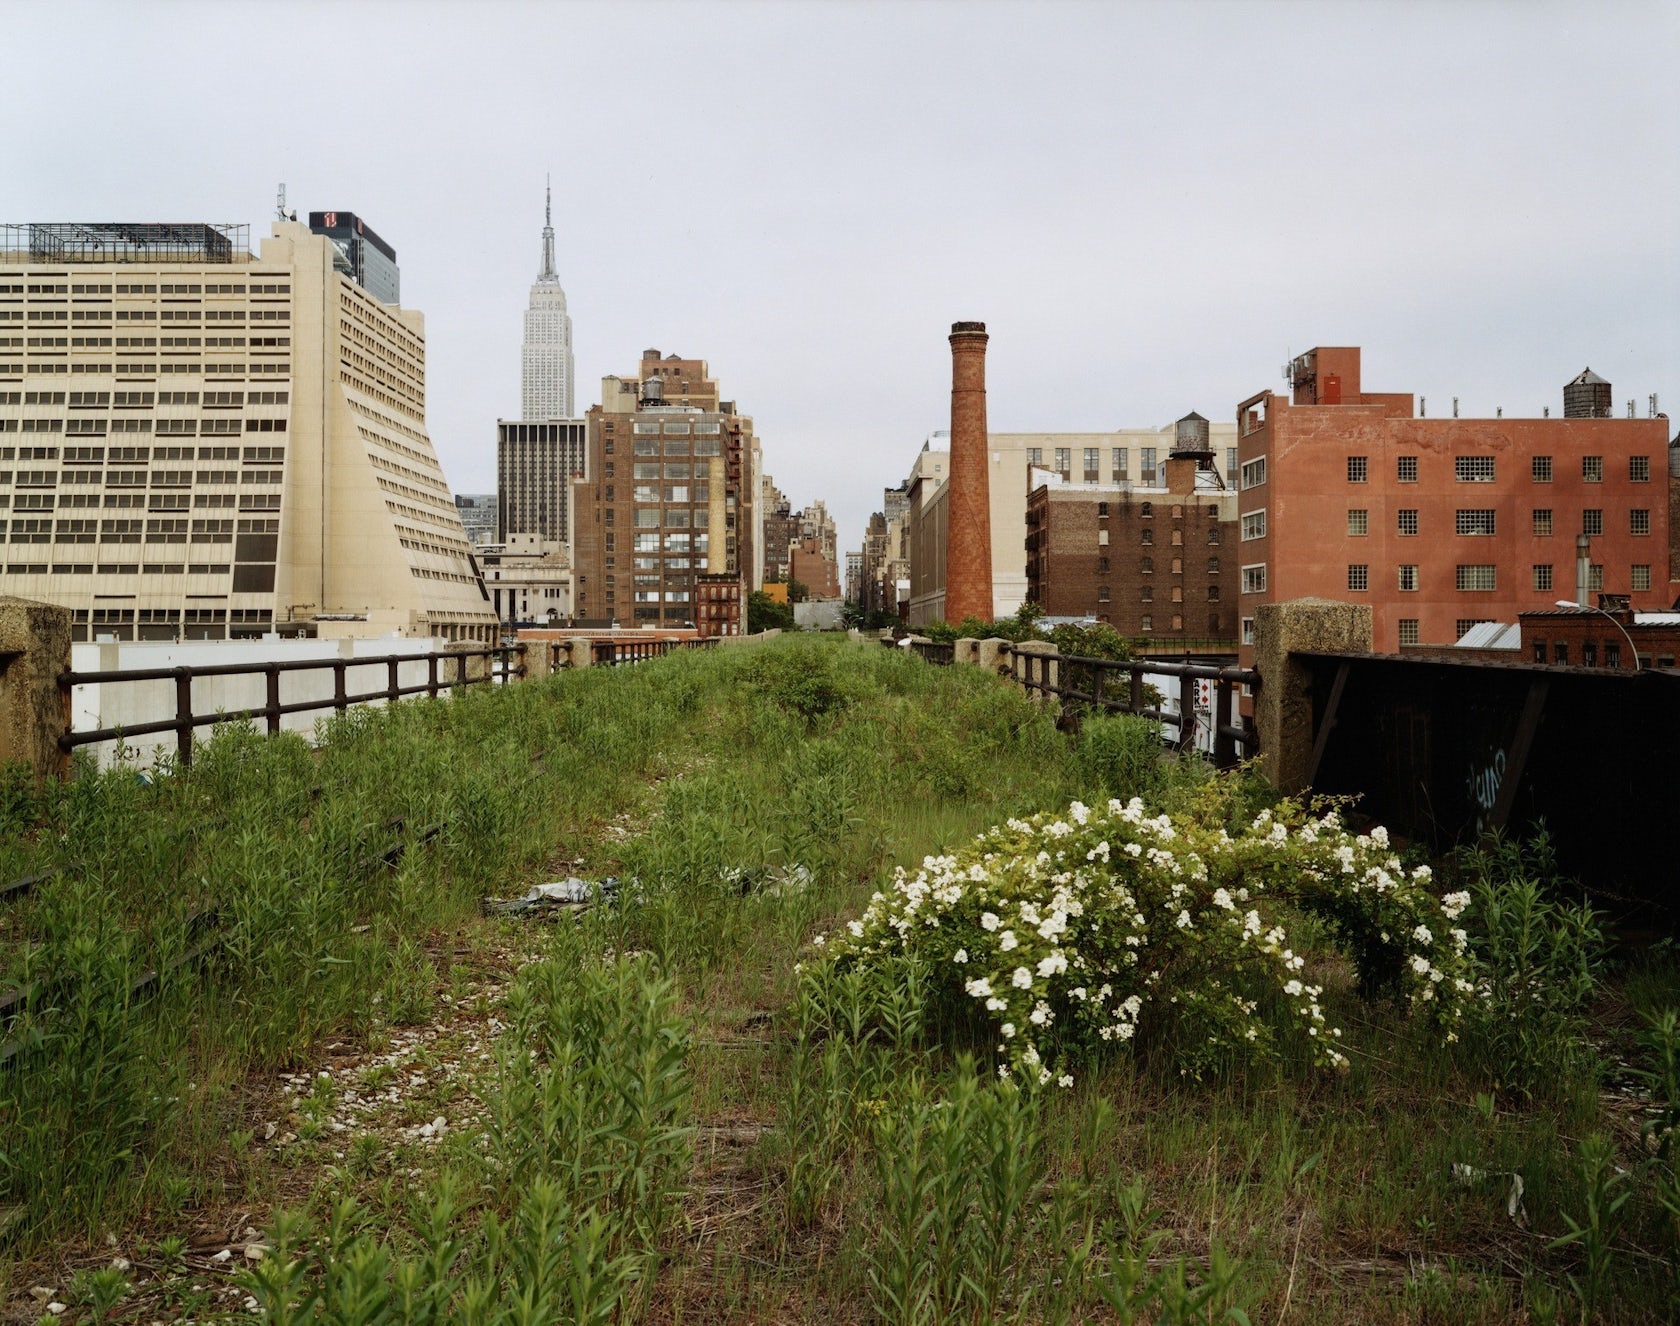 Narratives of place: New York's Highline and Central Park